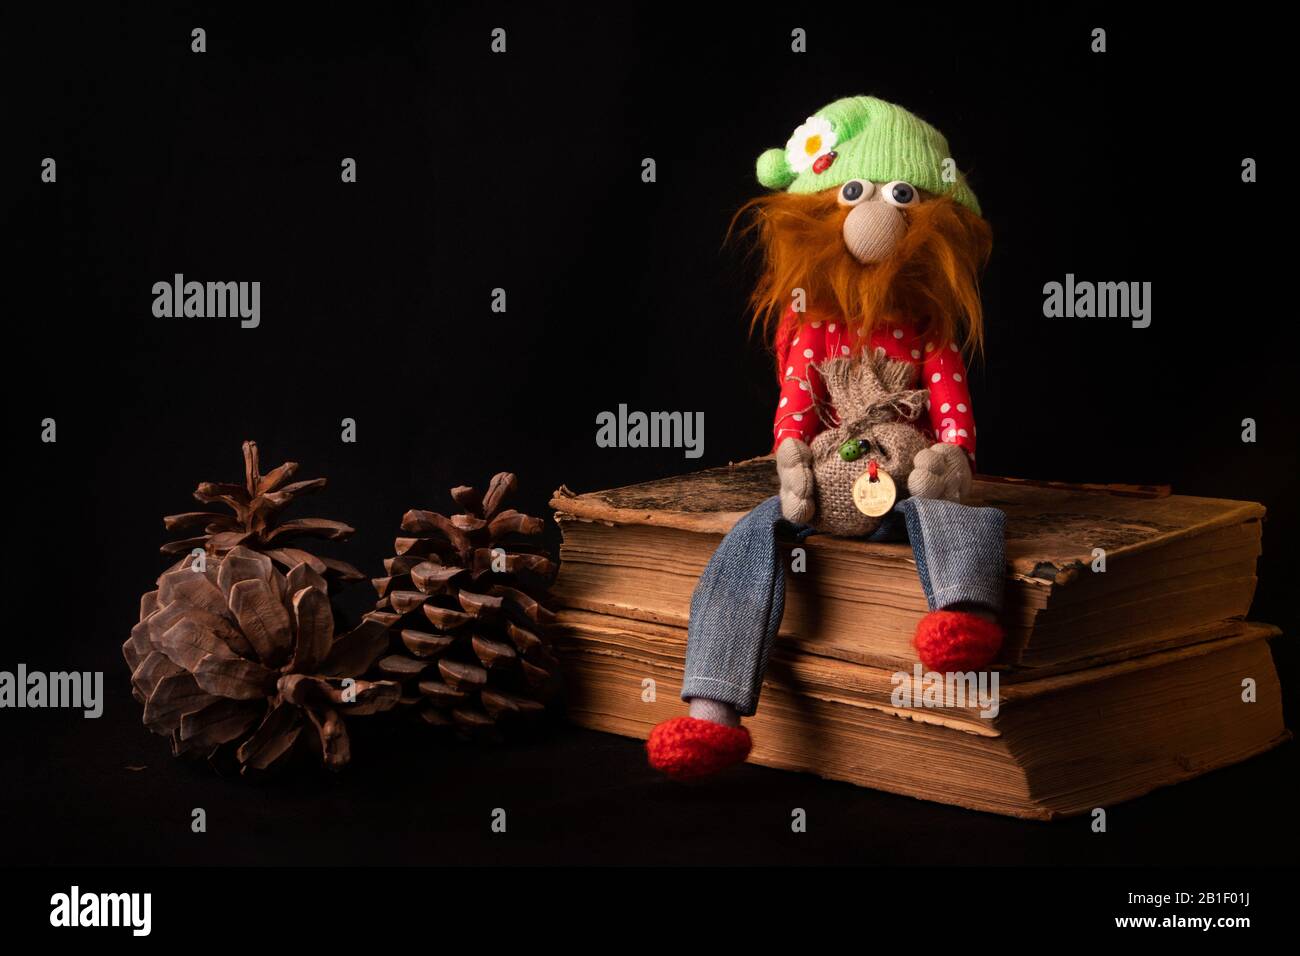 Funny fairytale dwarf with red shaggy beard sitting on ancient books, designer soft toy Stock Photo